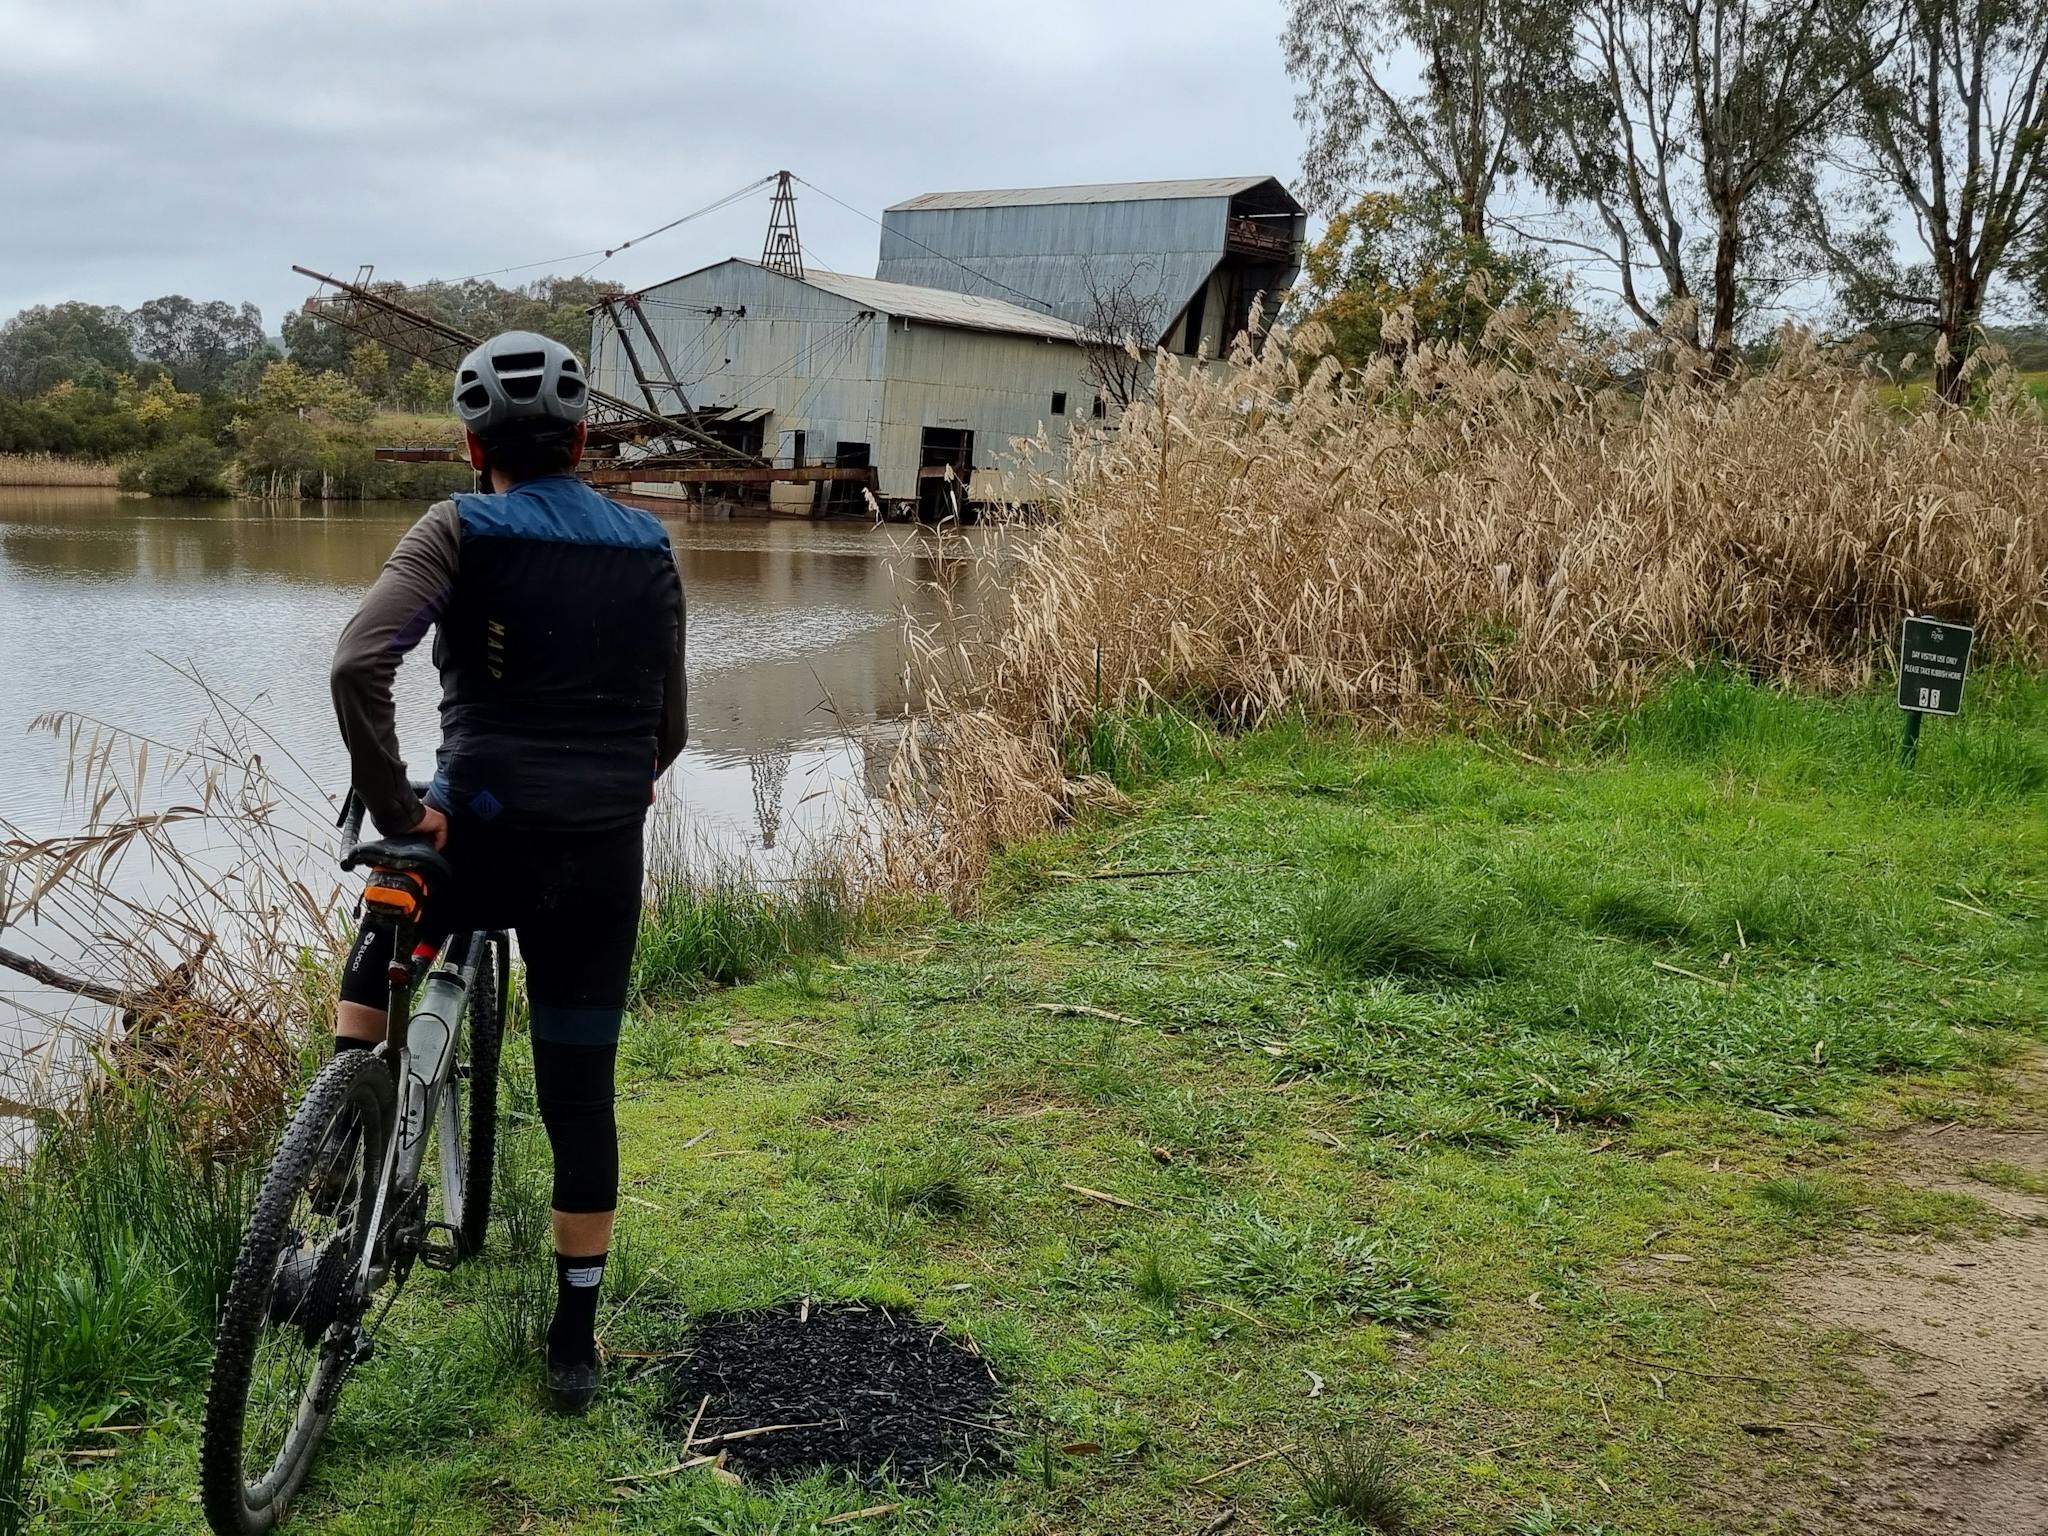 Cyclist looking over dredge pond to the dredge, rushes,  trees, bushes, grey sky